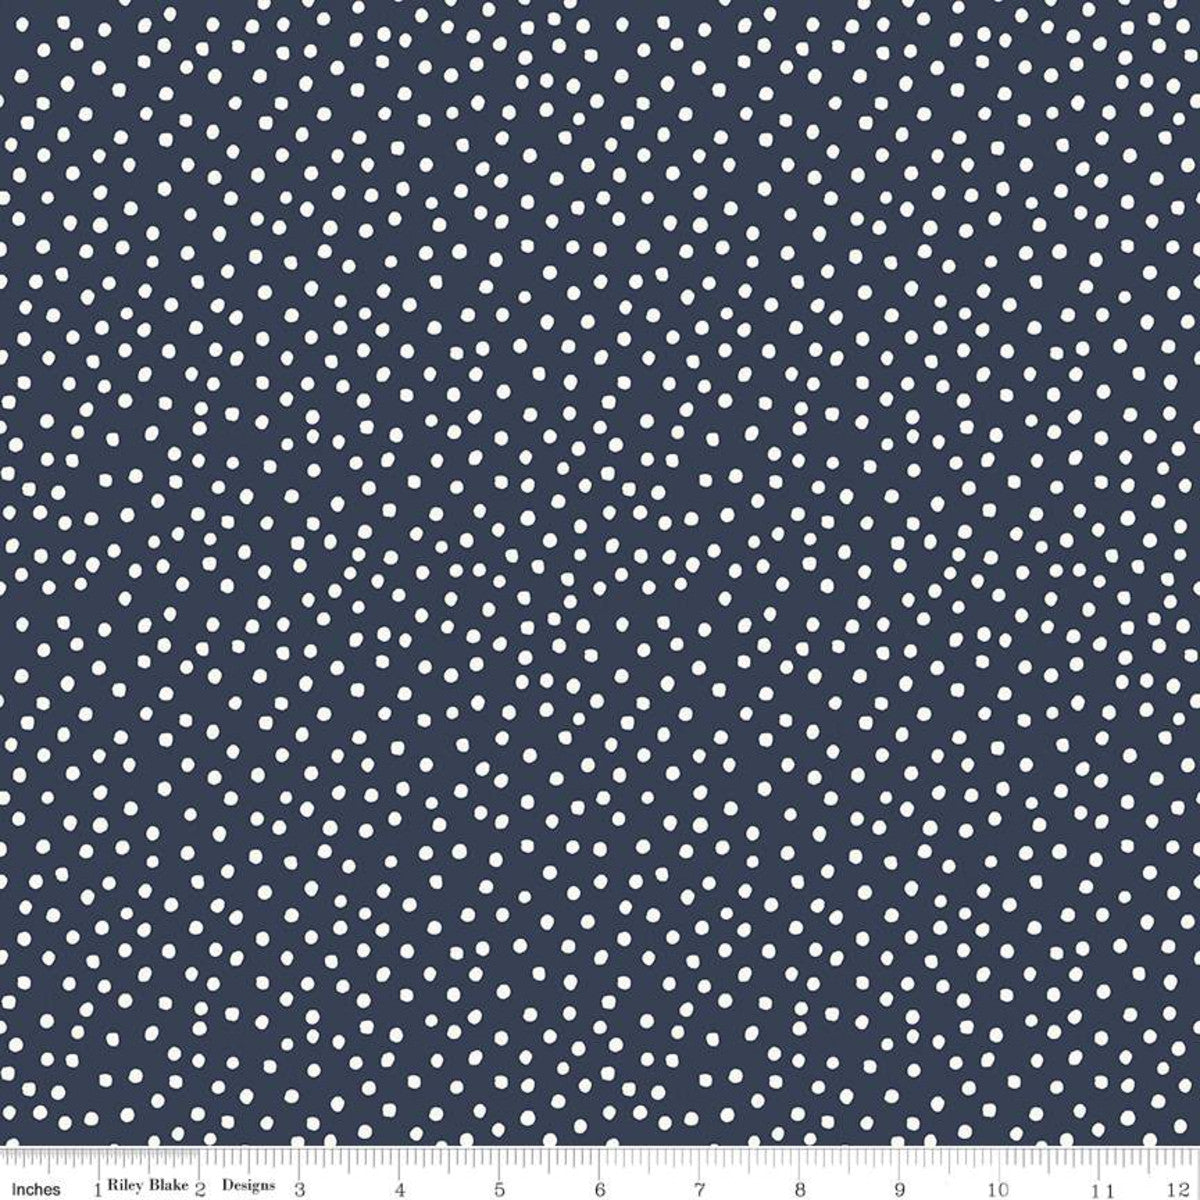 Gingham Foundry Dots on Navy - Weave & Woven